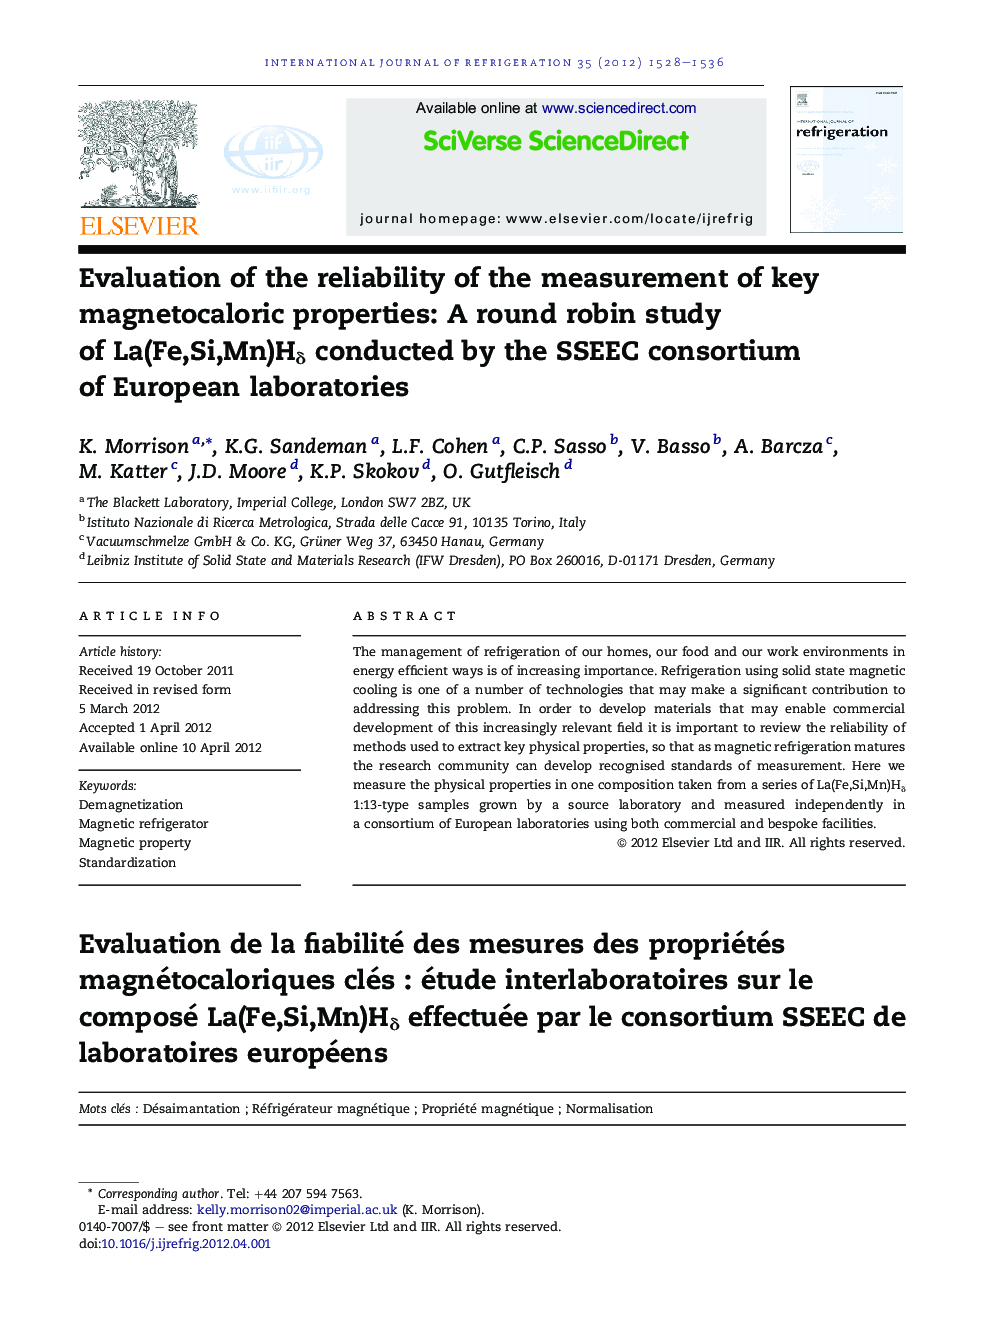 Evaluation of the reliability of the measurement of key magnetocaloric properties: A round robin study of La(Fe,Si,Mn)Hδ conducted by the SSEEC consortium of European laboratories